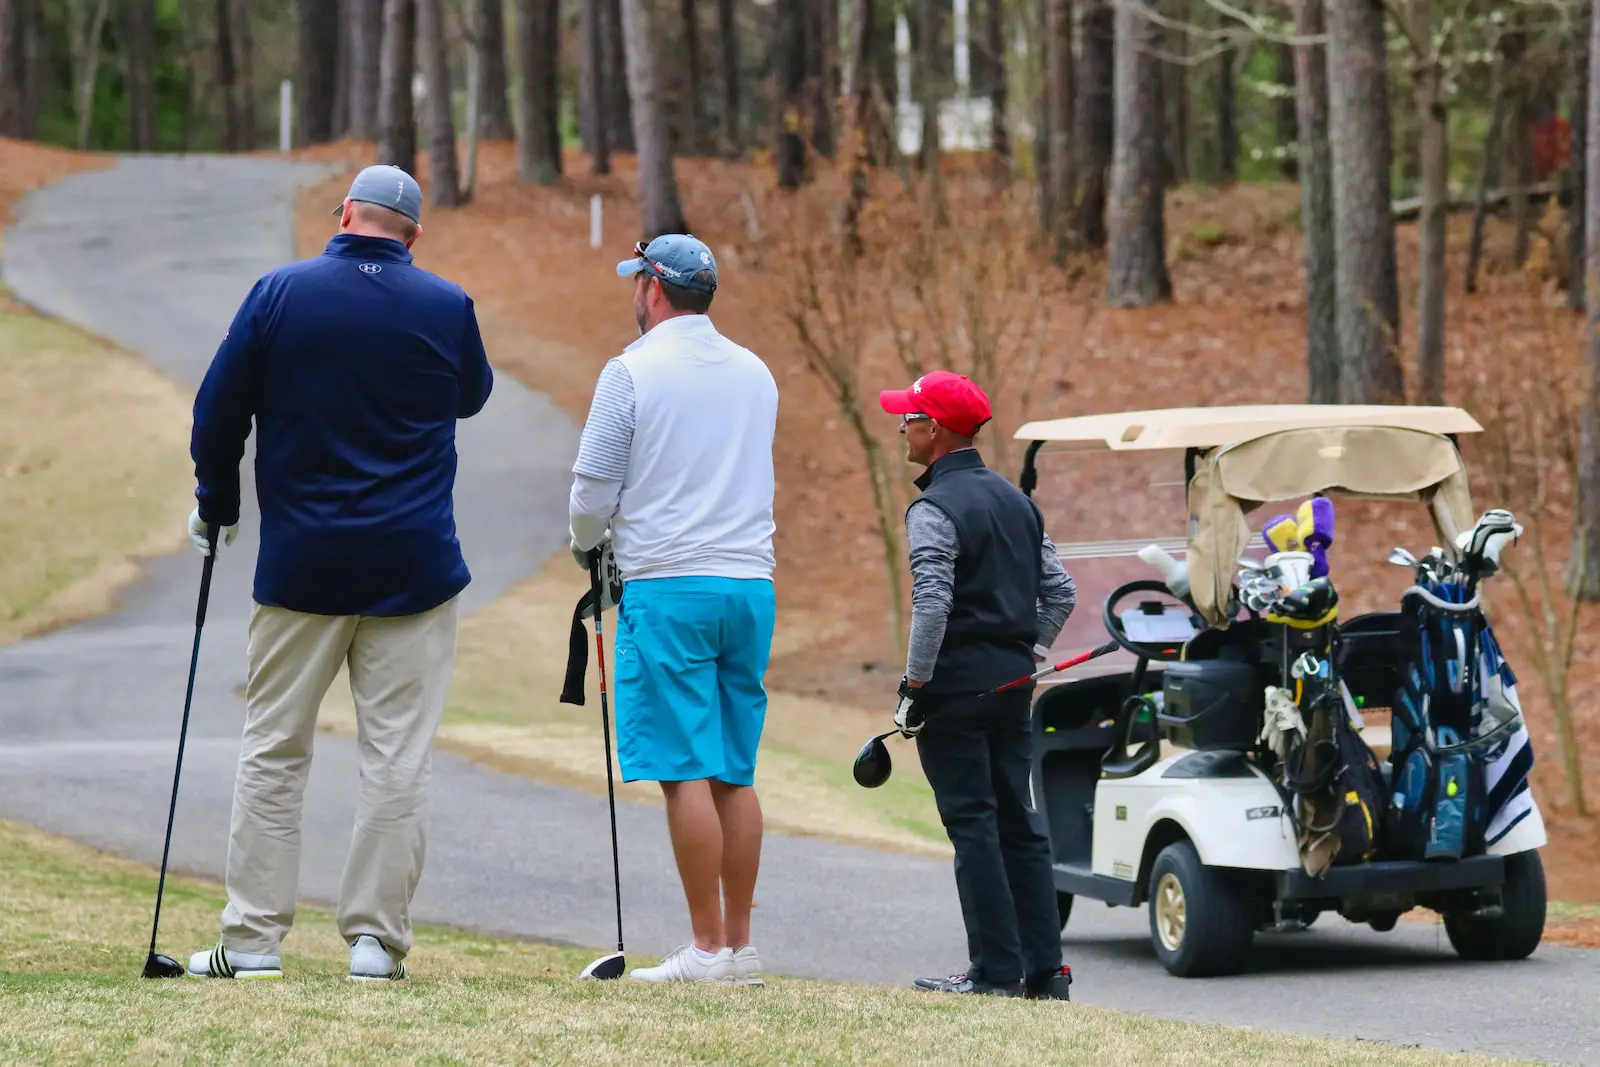 Golf Attracts a Specific Culture and Age of People